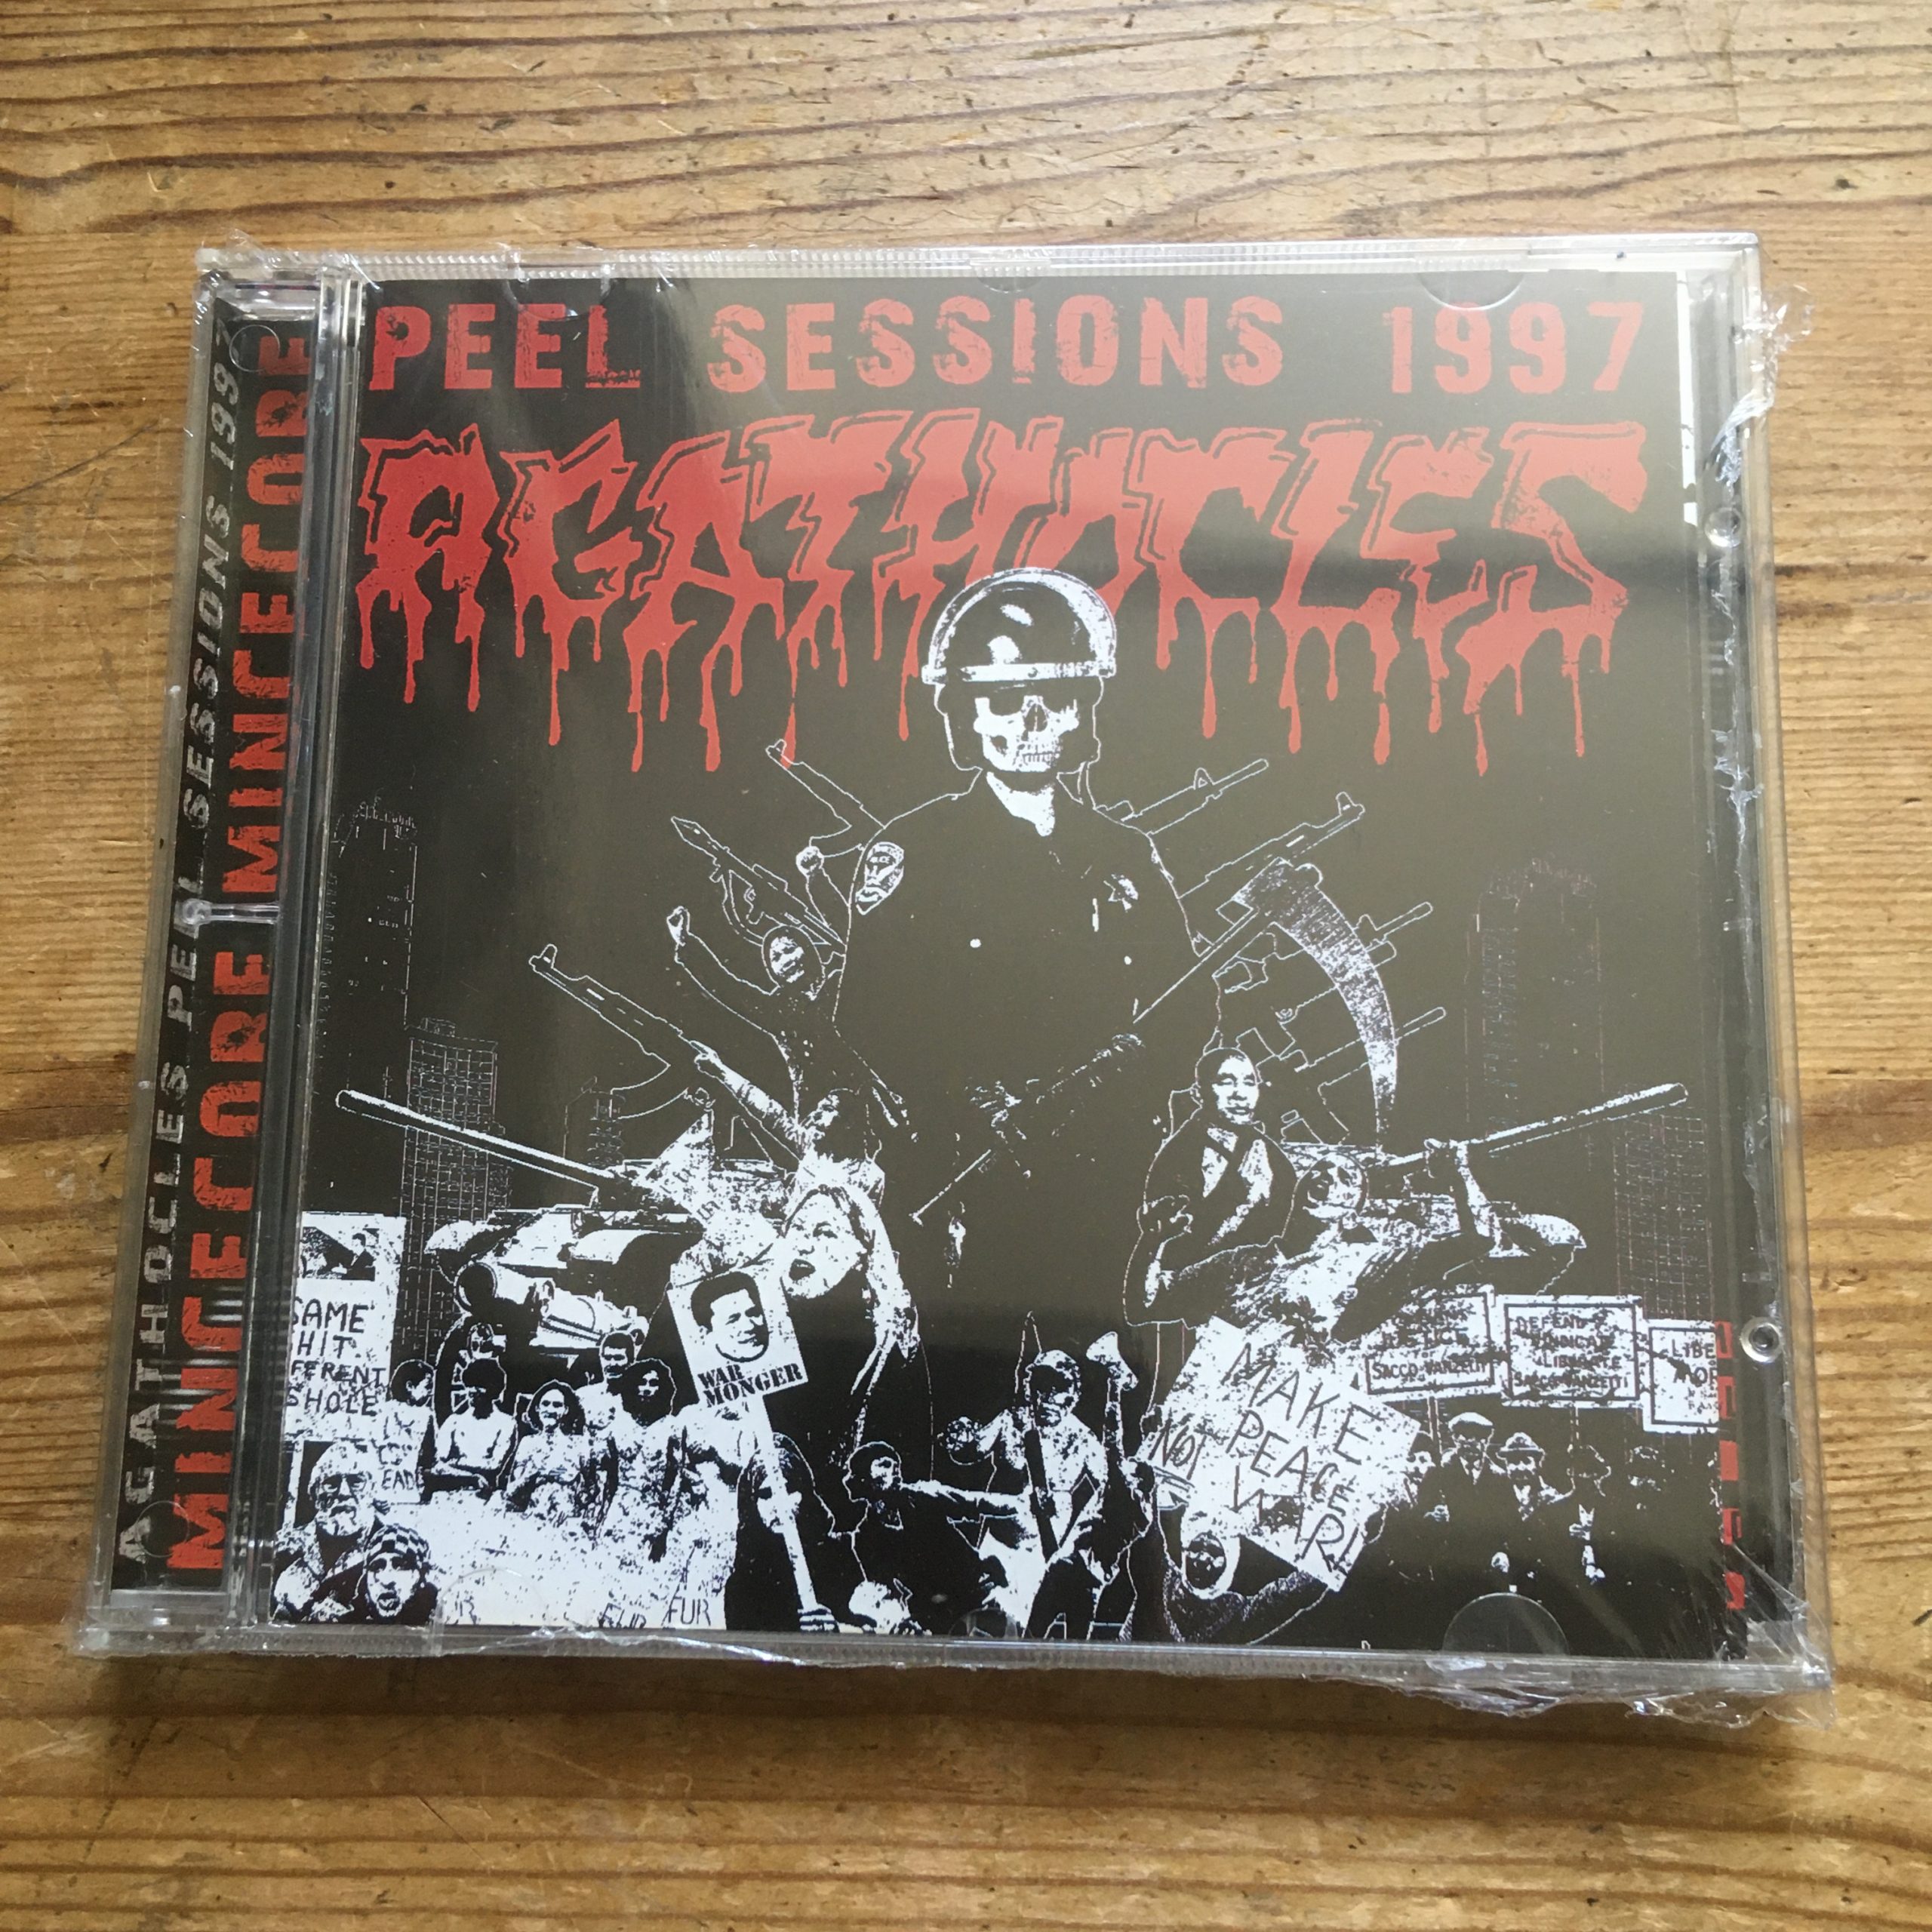 Photo of the Agathocles - "Peel Session 1997" CD